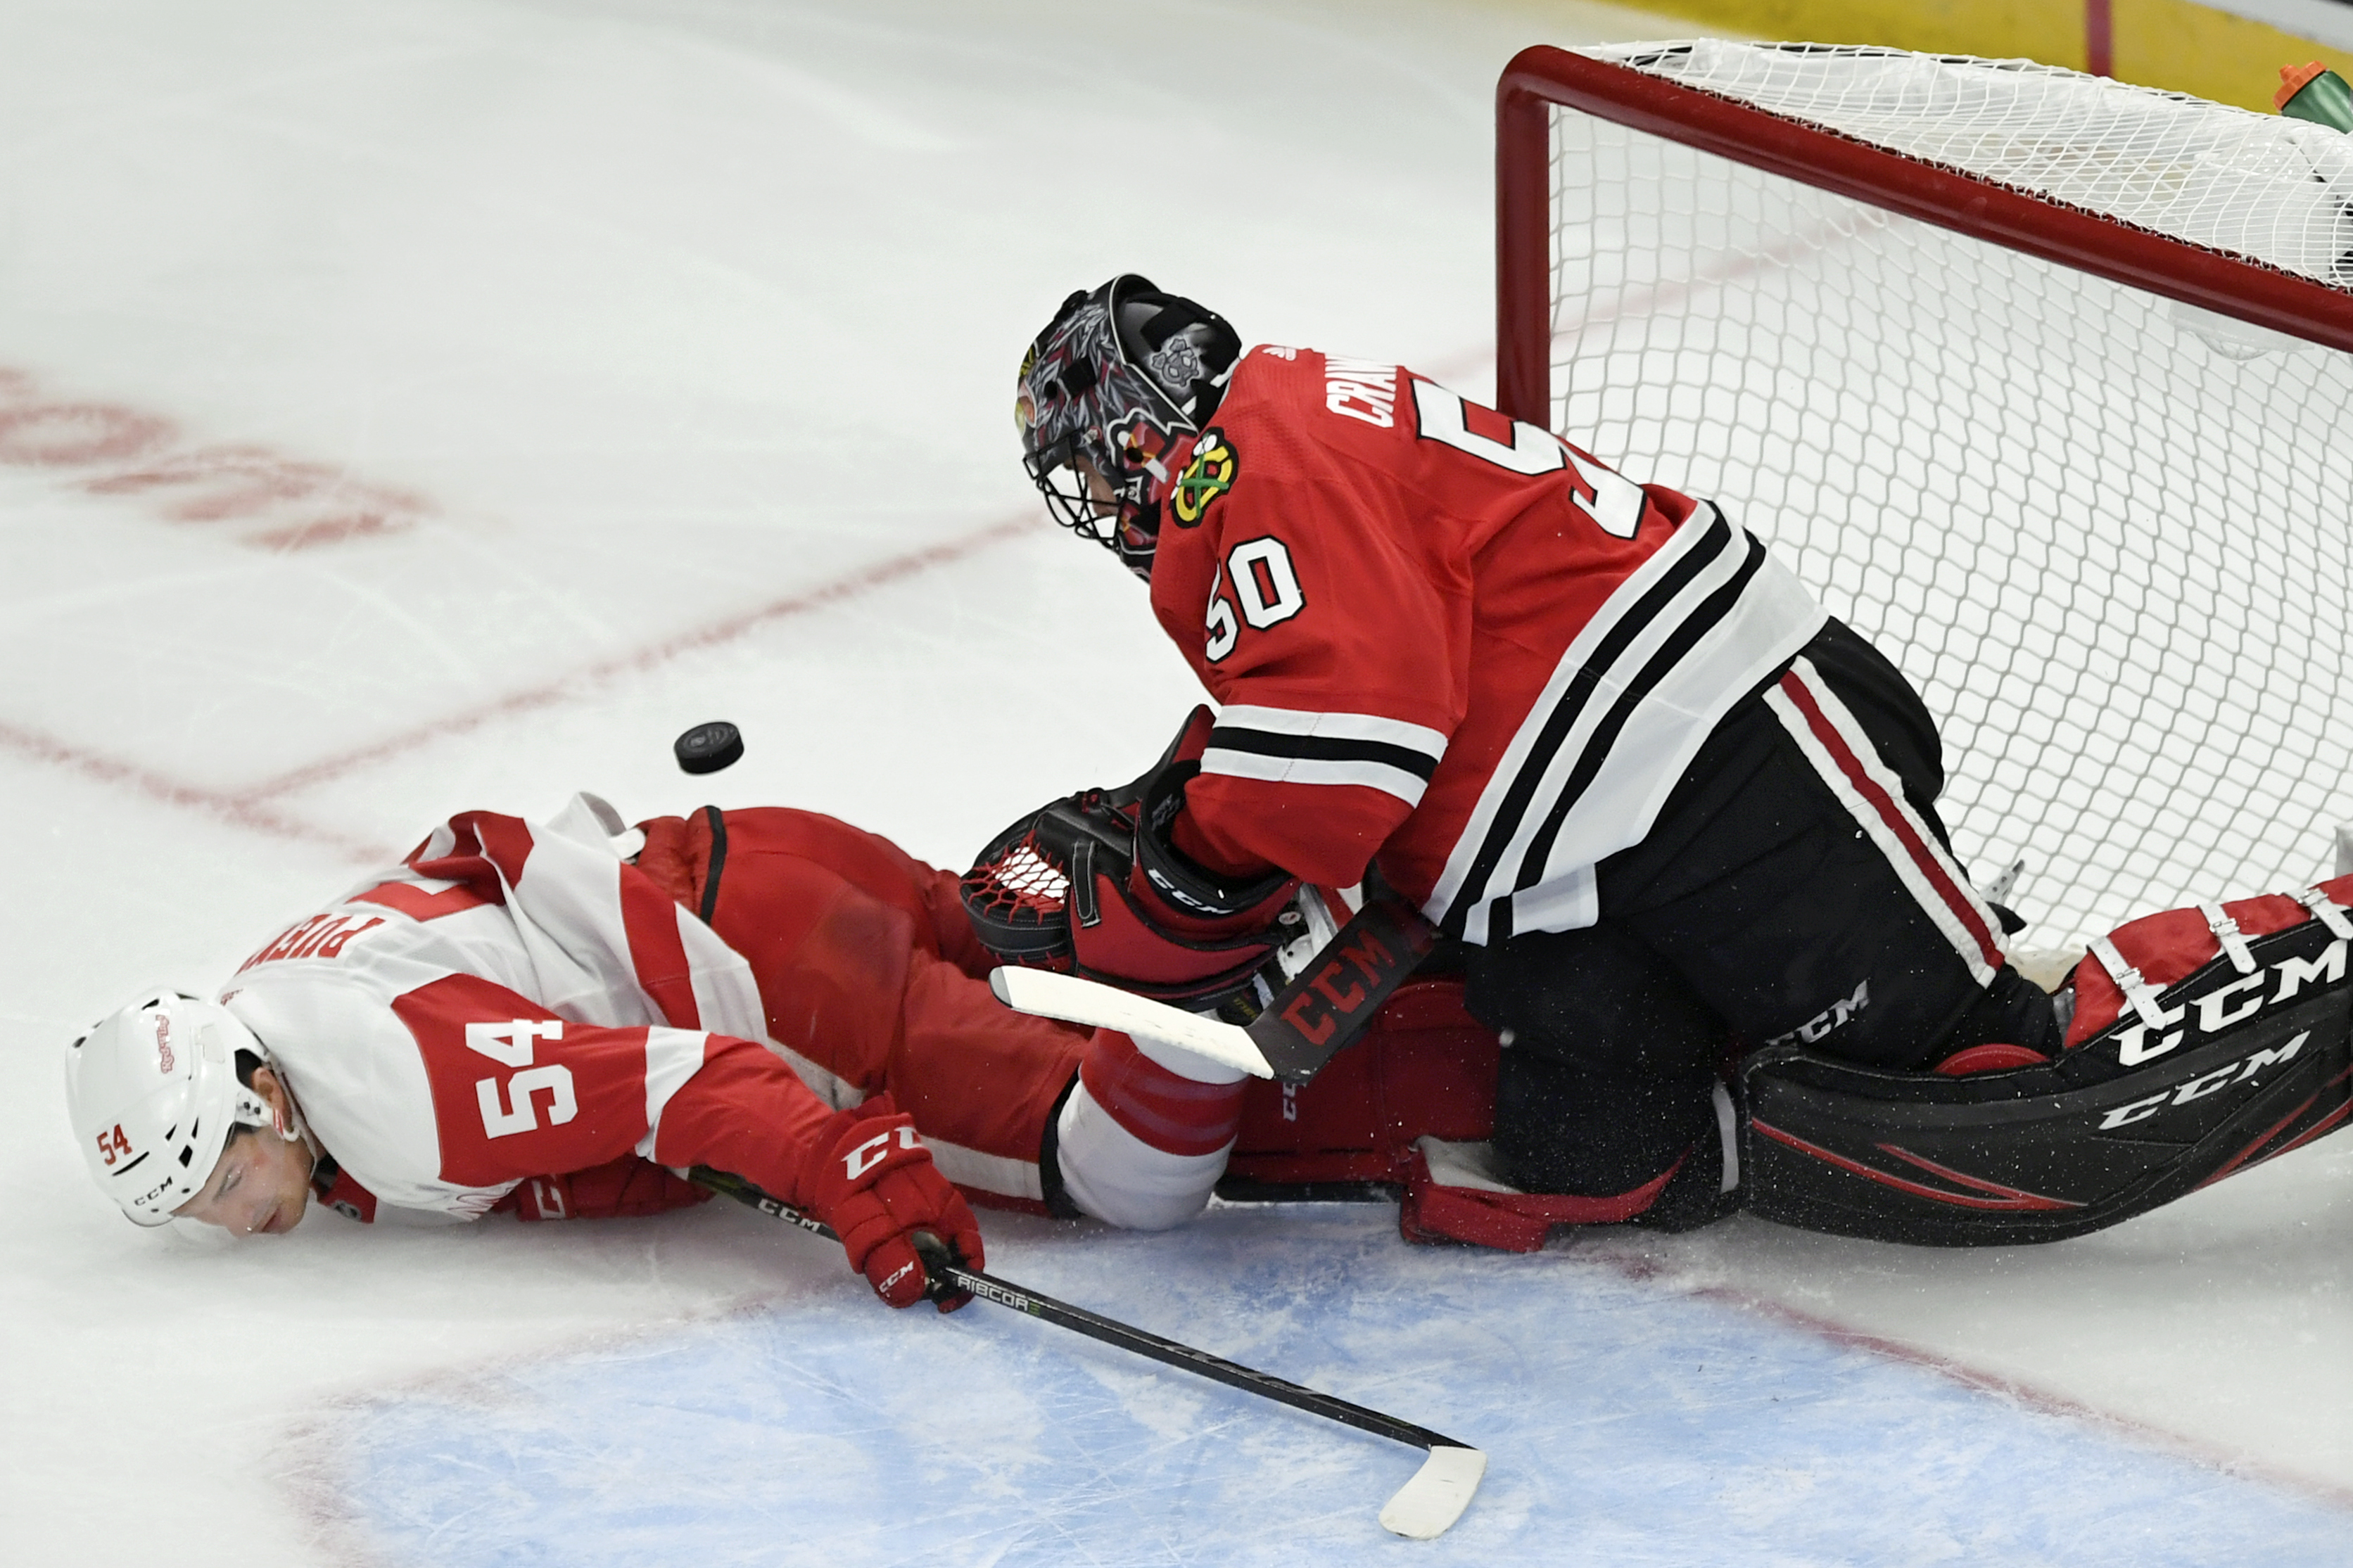 Corey Crawford retires from the NHL (Updated)